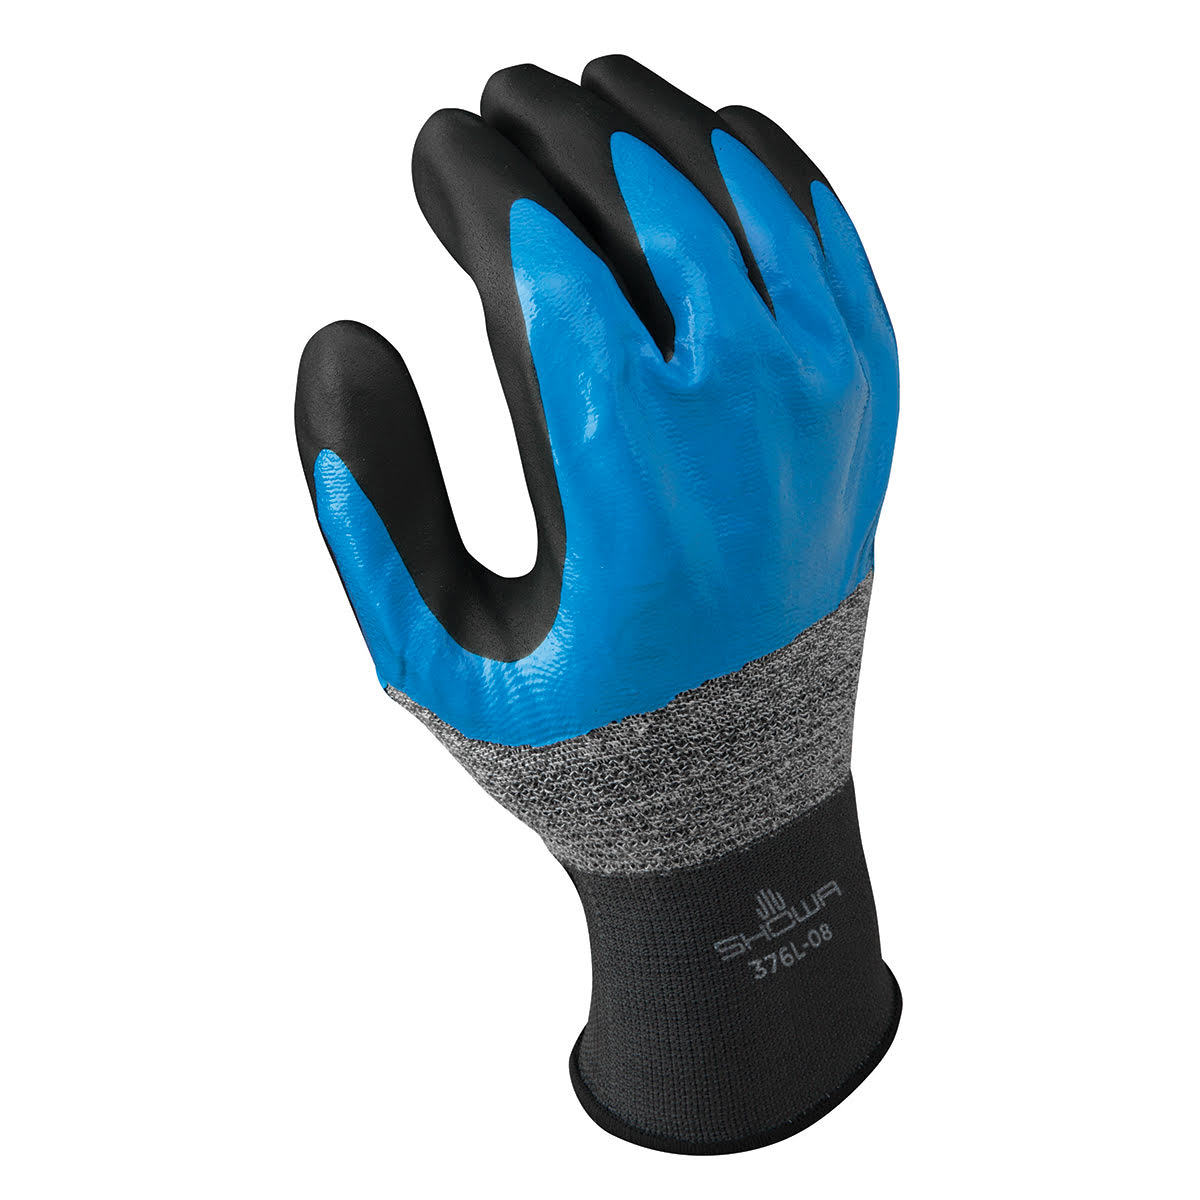 SHOWA® Size 7 13 Gauge Foam Nitrile Full Hand Coated Work Gloves With Knit Liner And Knit Wrist